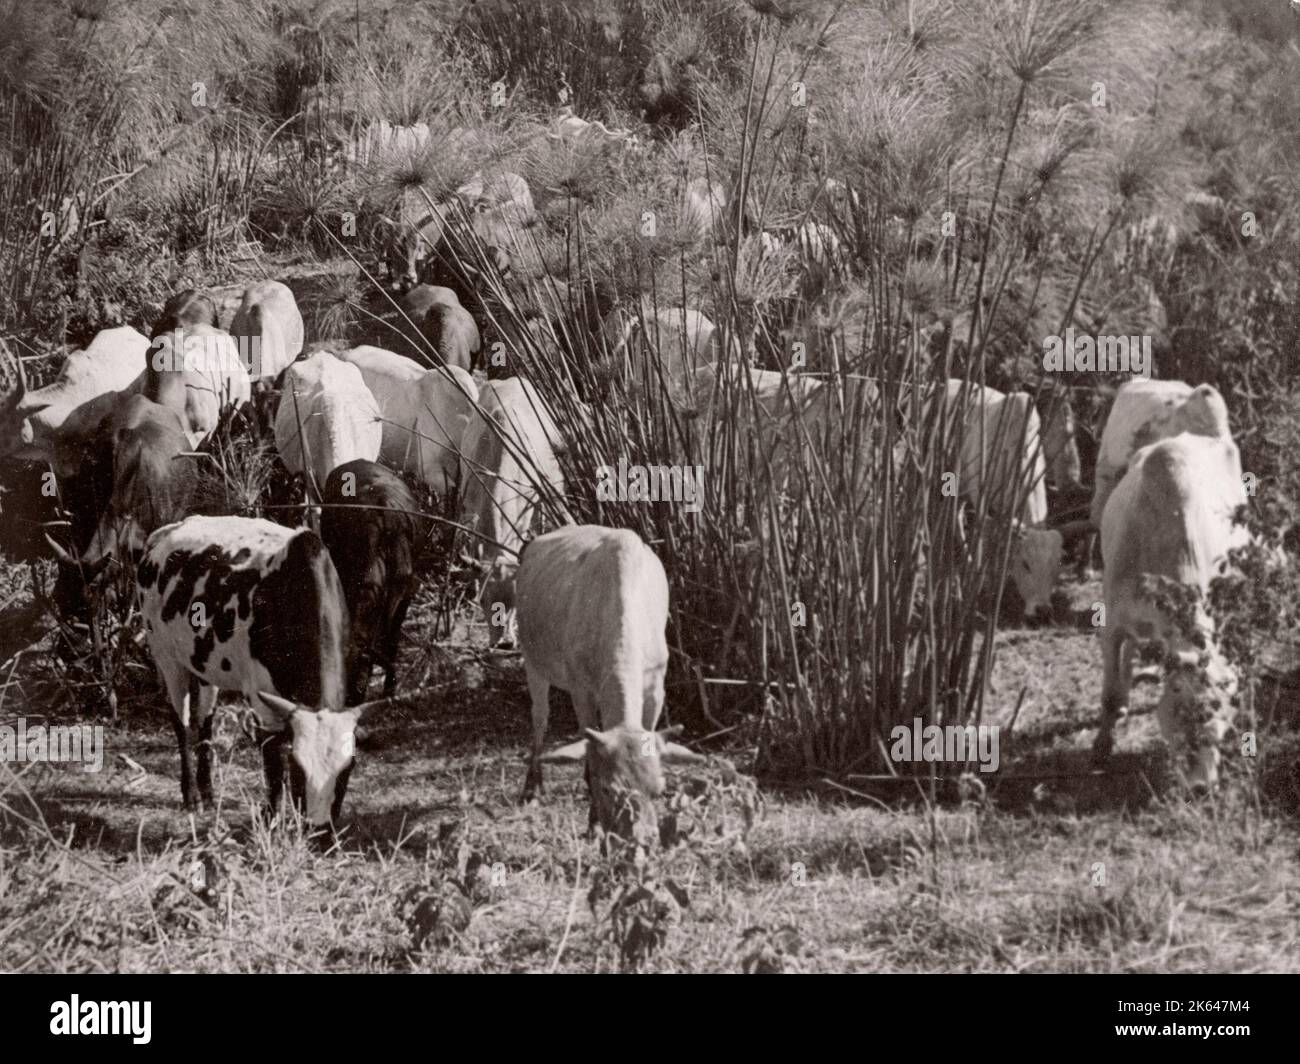 1940s East Africa - native African cross-bred cattle Photograph by a British army recruitment officer stationed in East Africa and the Middle East during World War II Stock Photo